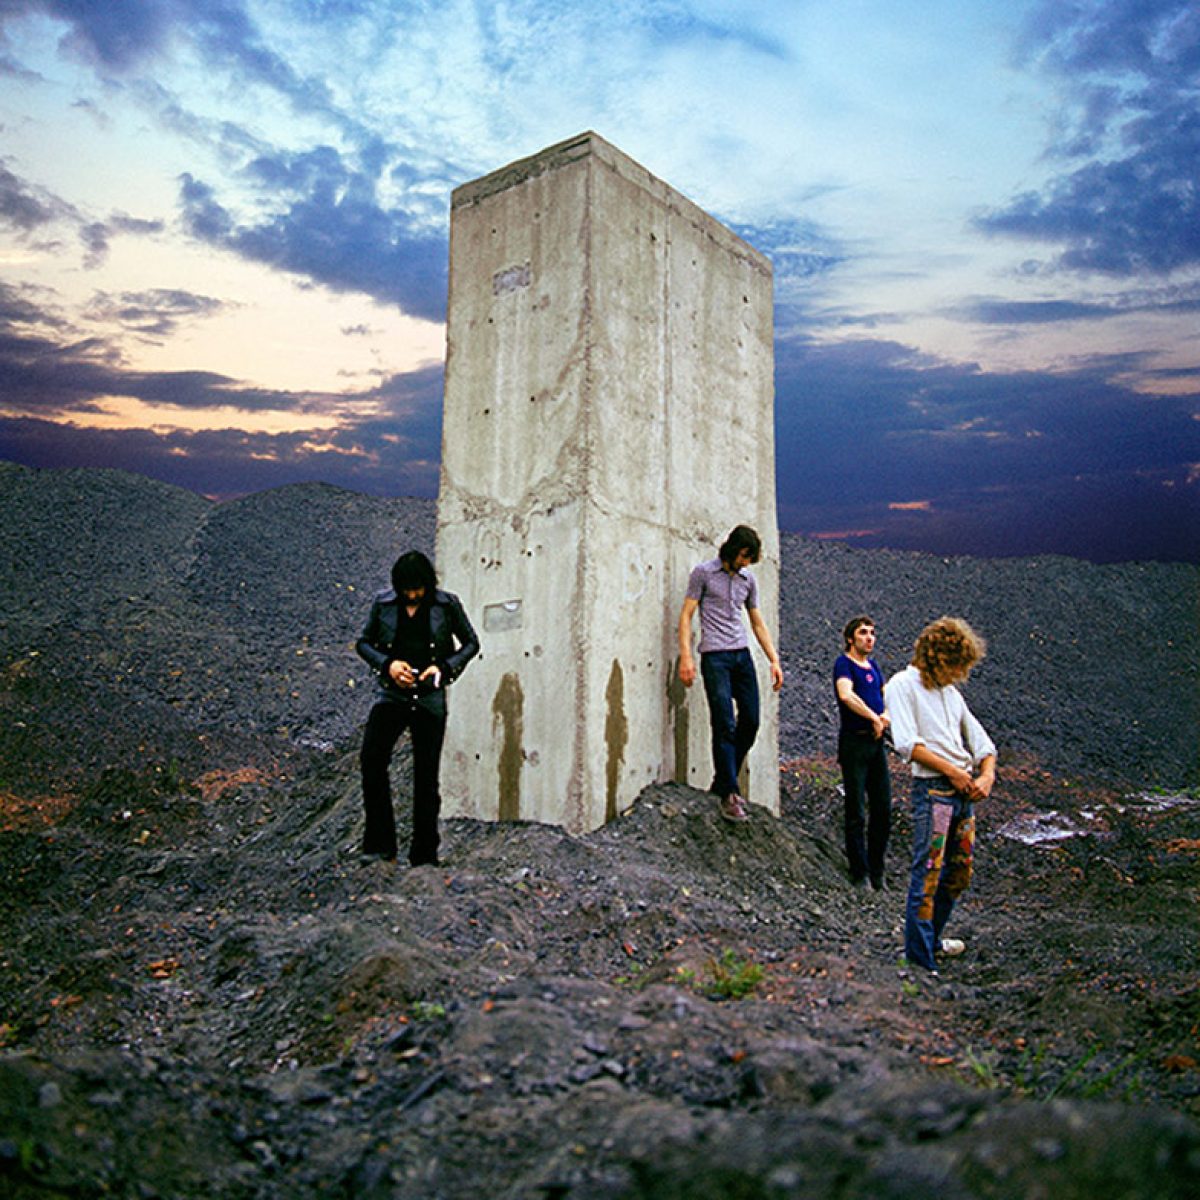 The Who, Who's next